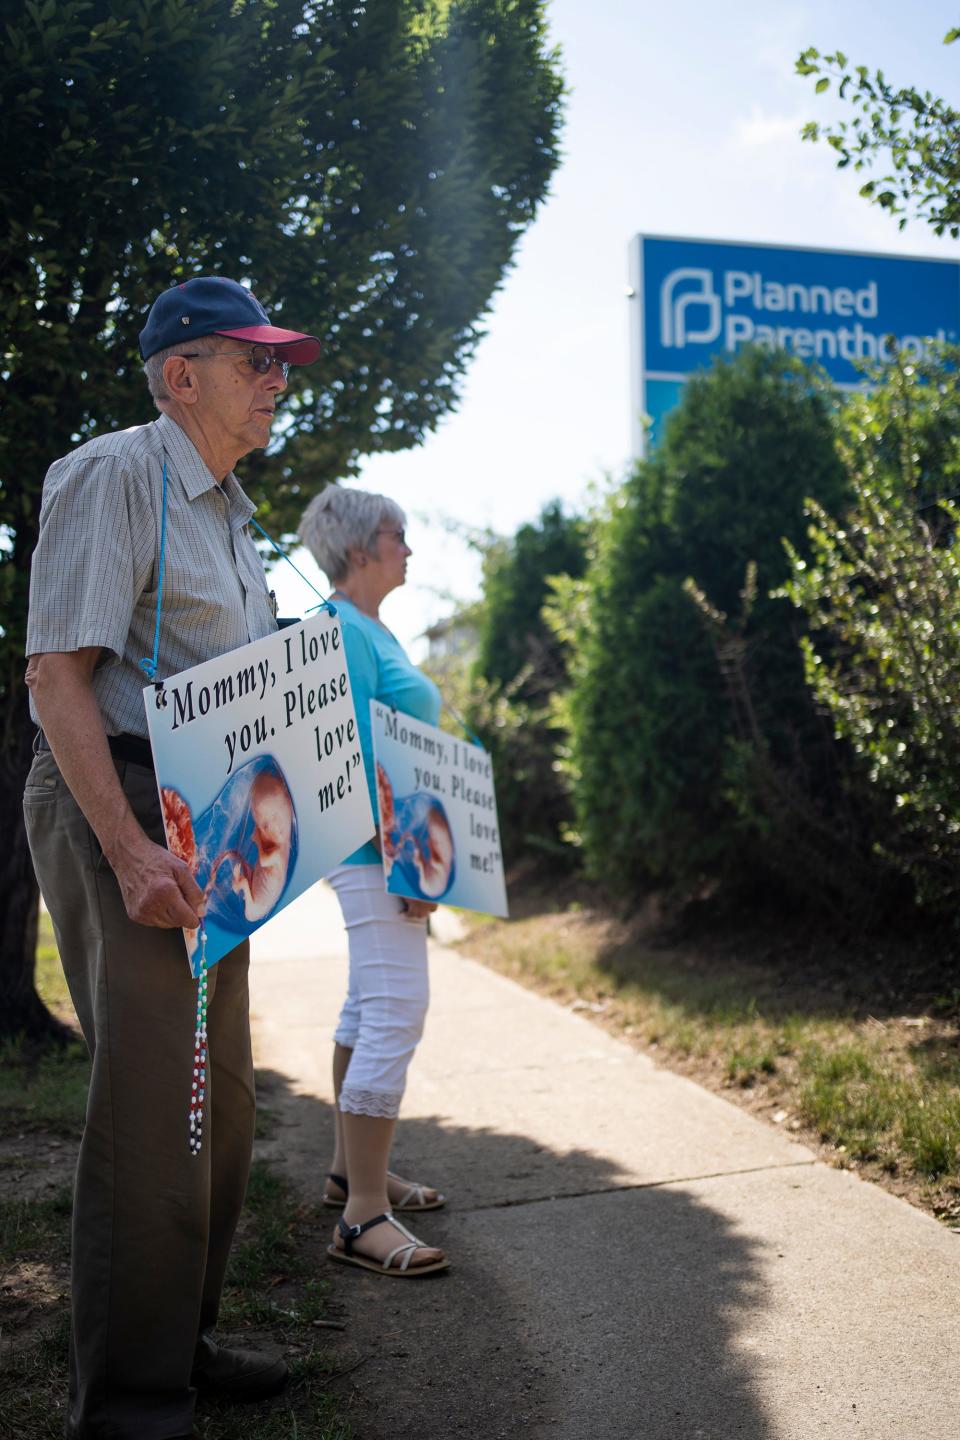 Jim and Donna Eckman, drove from Plain City to protest and pray outside of a closed Planned Parenthood on E. Main Street in Columbus, before the Supreme Court decision was announced.